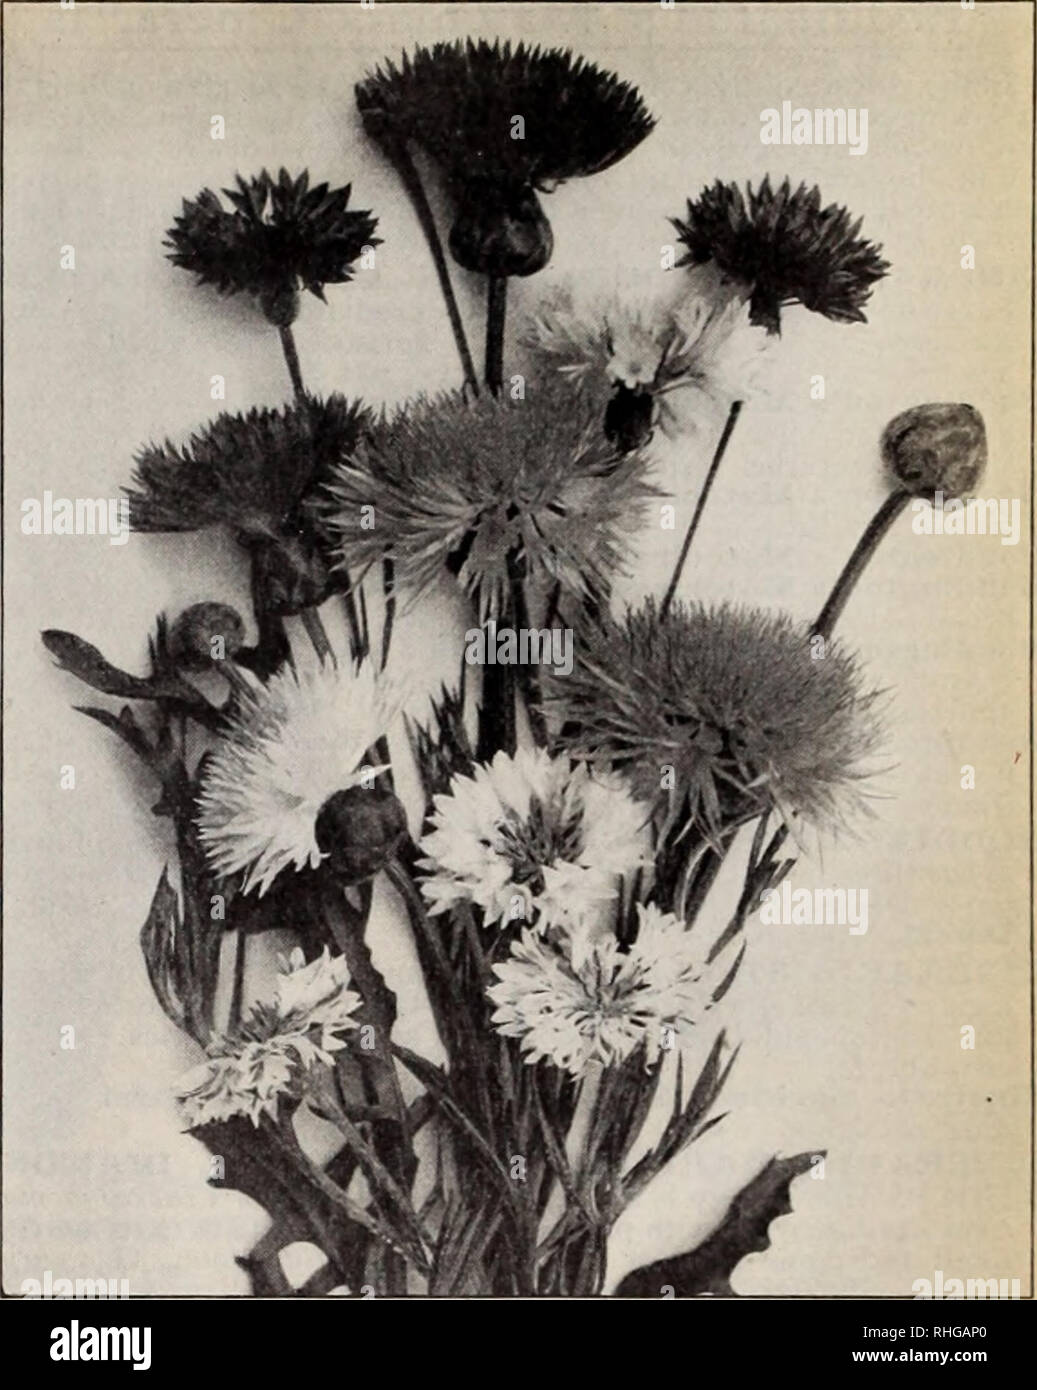 . Boddington's quality bulbs, seeds and plants / Arthur T. Boddington.. Nursery Catalogue. BODDINGTON'S ^.yUCLtlVl/ SEEDS 21 Centaurea H.H.P. and H.A. I ft. For Candidissima (Dusty Miller), i ft. For borders or Pkt. Or. edgings !&lt;oz., $i..$o 20 Gymnocarpa. Taller than the above 10 jjo 80 Odorata, Chameleon. Yellow and rose; very fragrant. 10 2 00 Margaritae. ij^ ft. Flowers 2K inches across, of the purest white and delightfully scented. A garden treasure. 10 i 00 Suaveolens (Yellow Sweet Sultan) 10 60 Montana, Blue. H.P. 2 ft. Summer 10 alba. H.P. 2 ft. White 10 CYAN US (Blue Cornflower, or Stock Photo